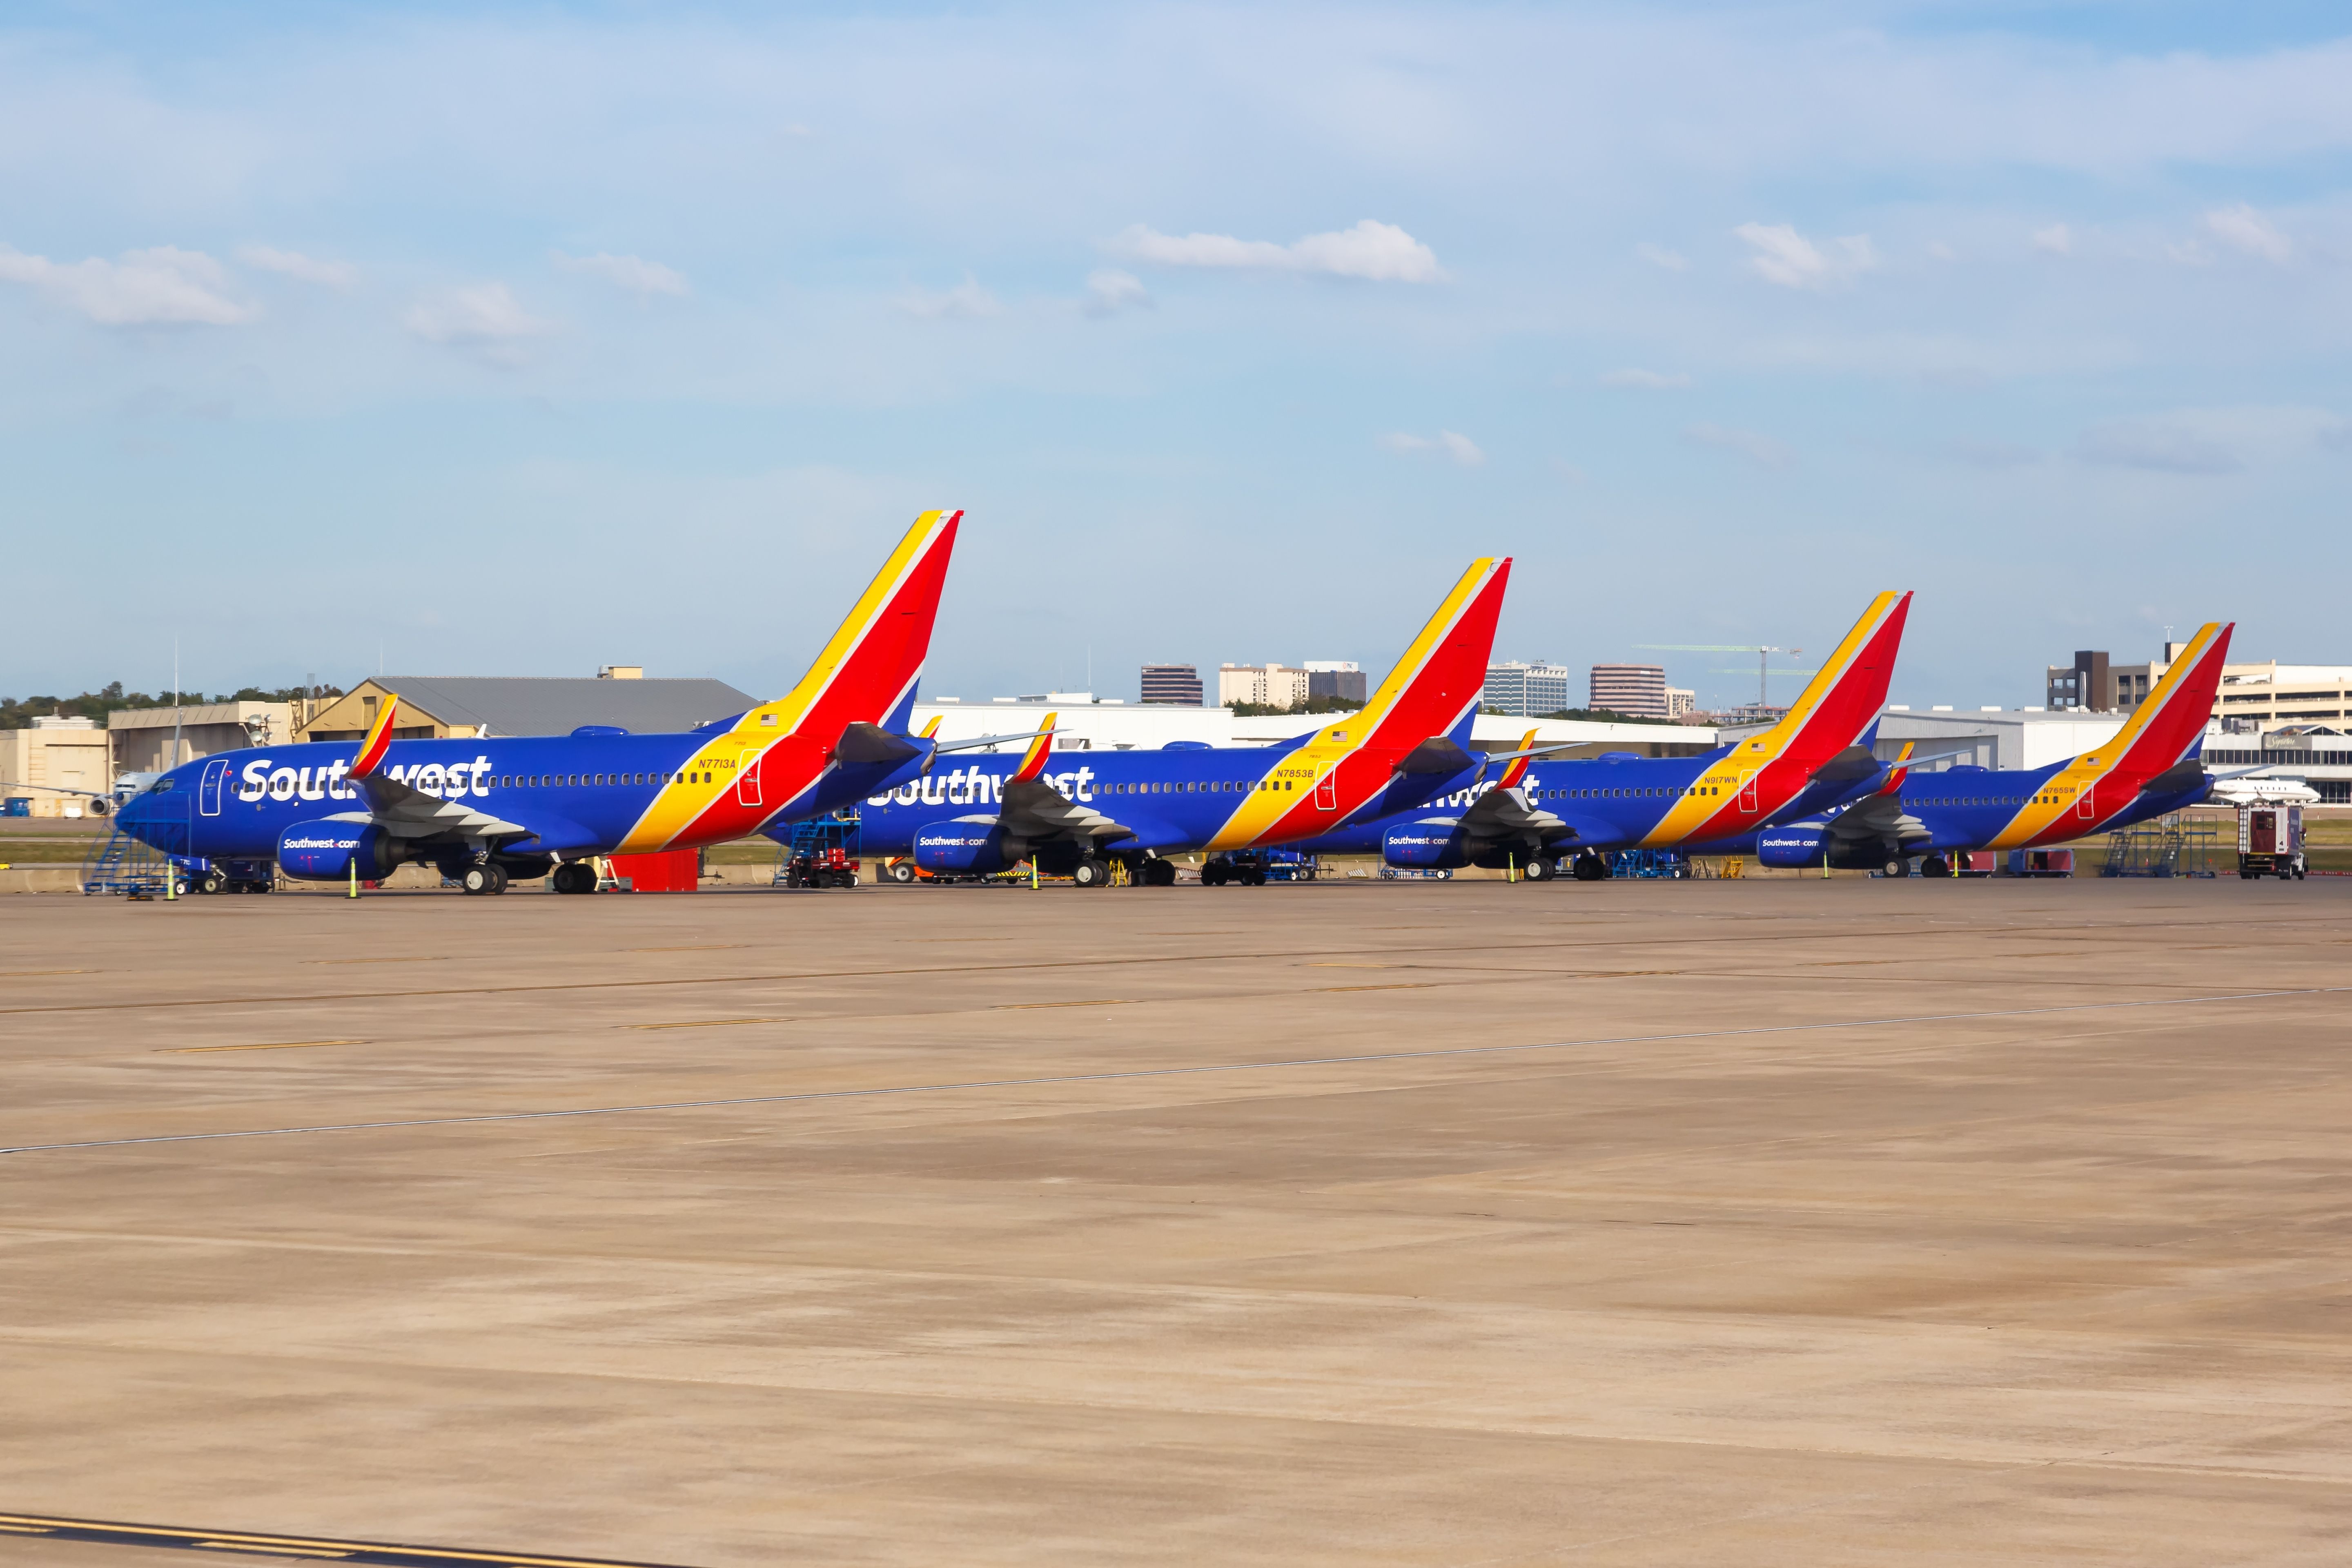 Several Southwest Airlines Boeing 737s Parked on the apron In Dallas.